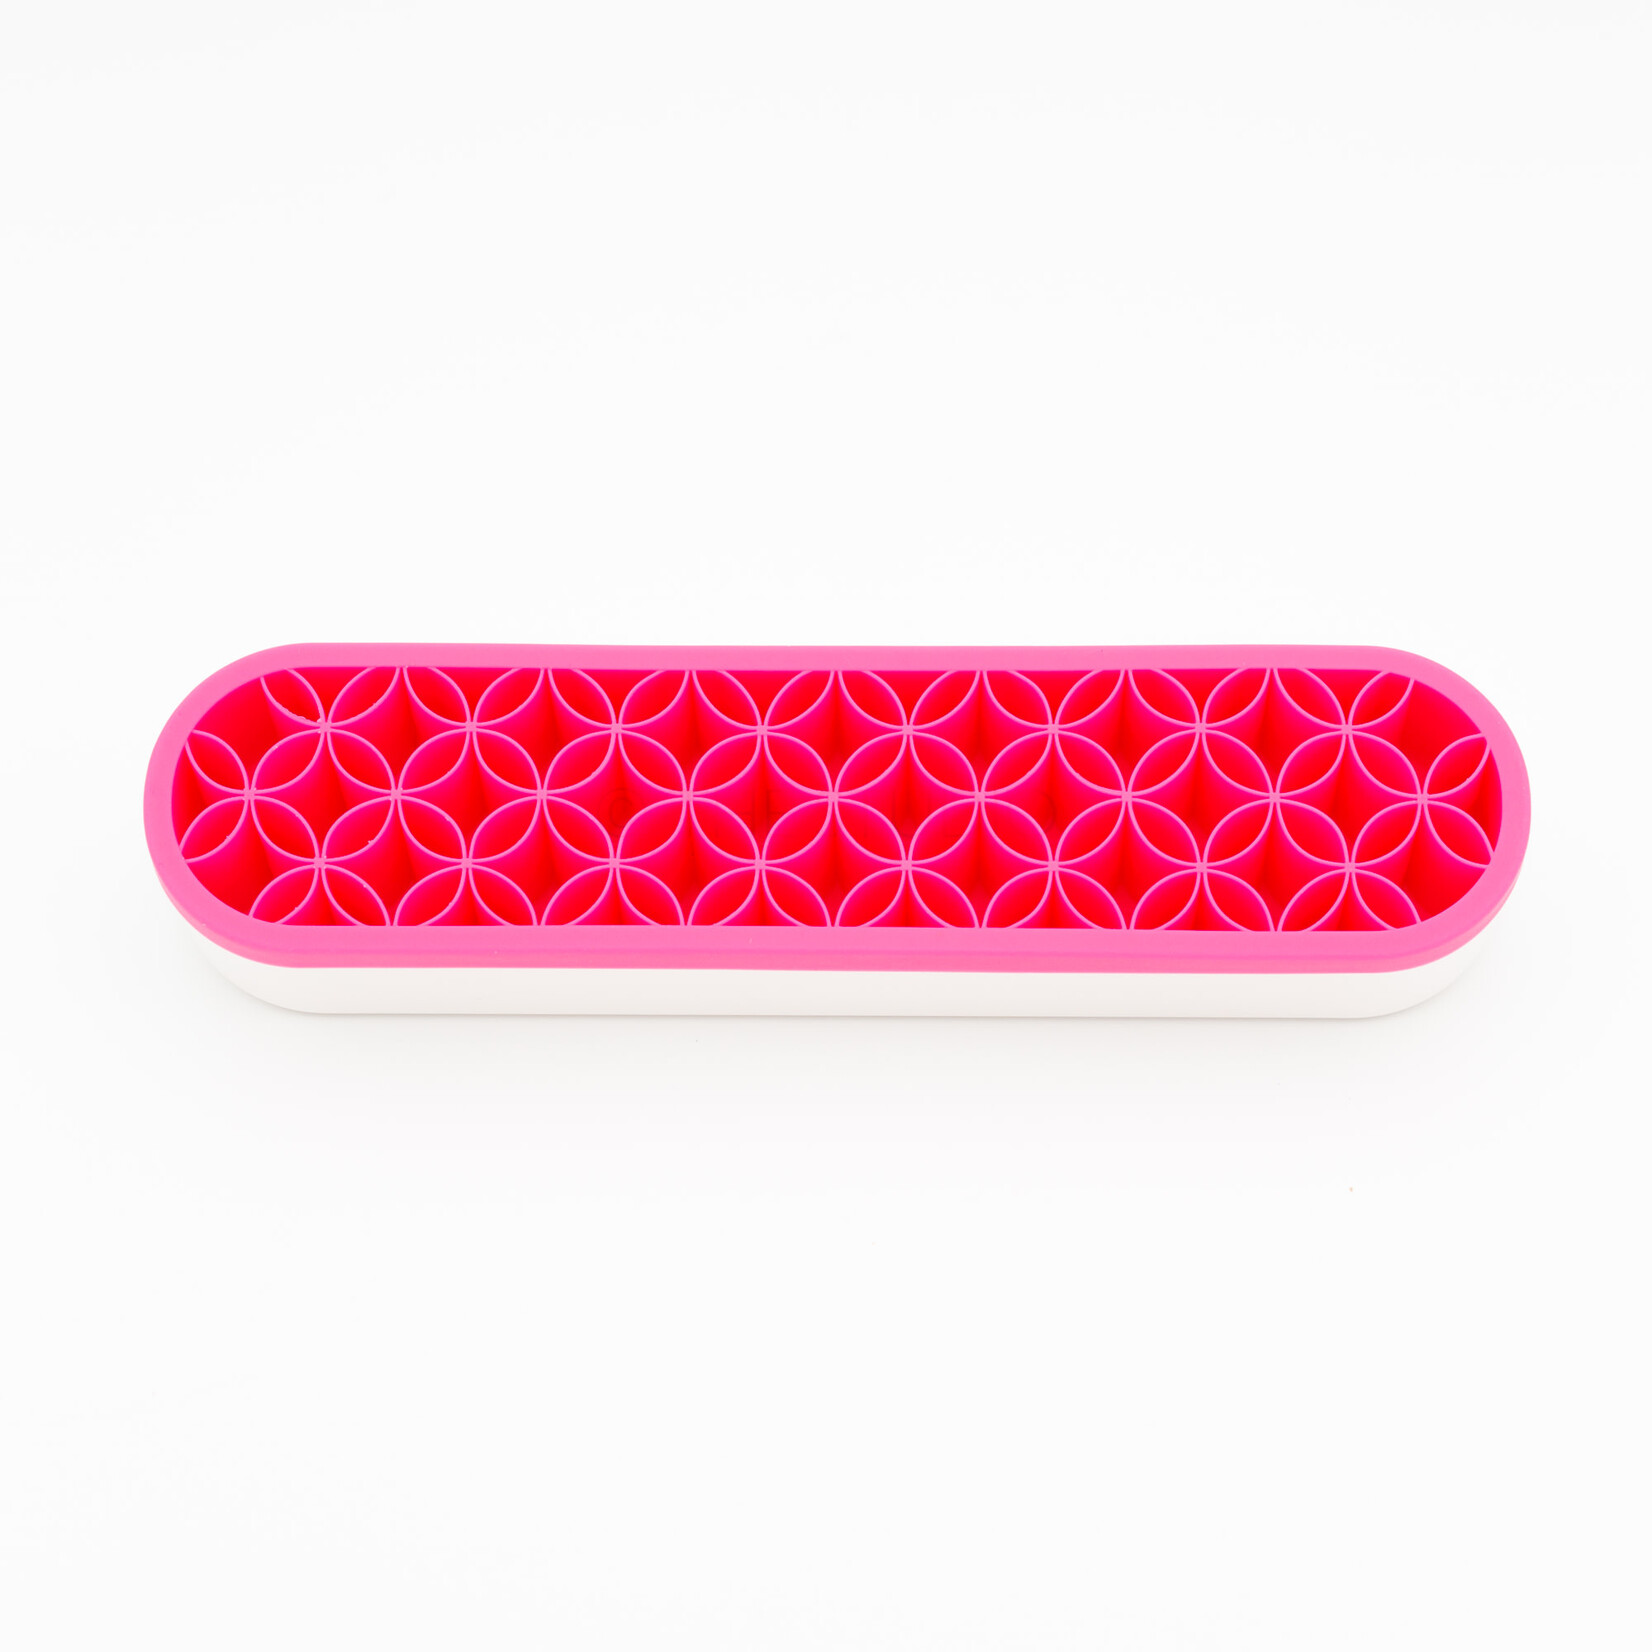 Beautyinspo - Silicone Brush Holder - BI-SBH - The Studio - Nail and Beauty  Supply